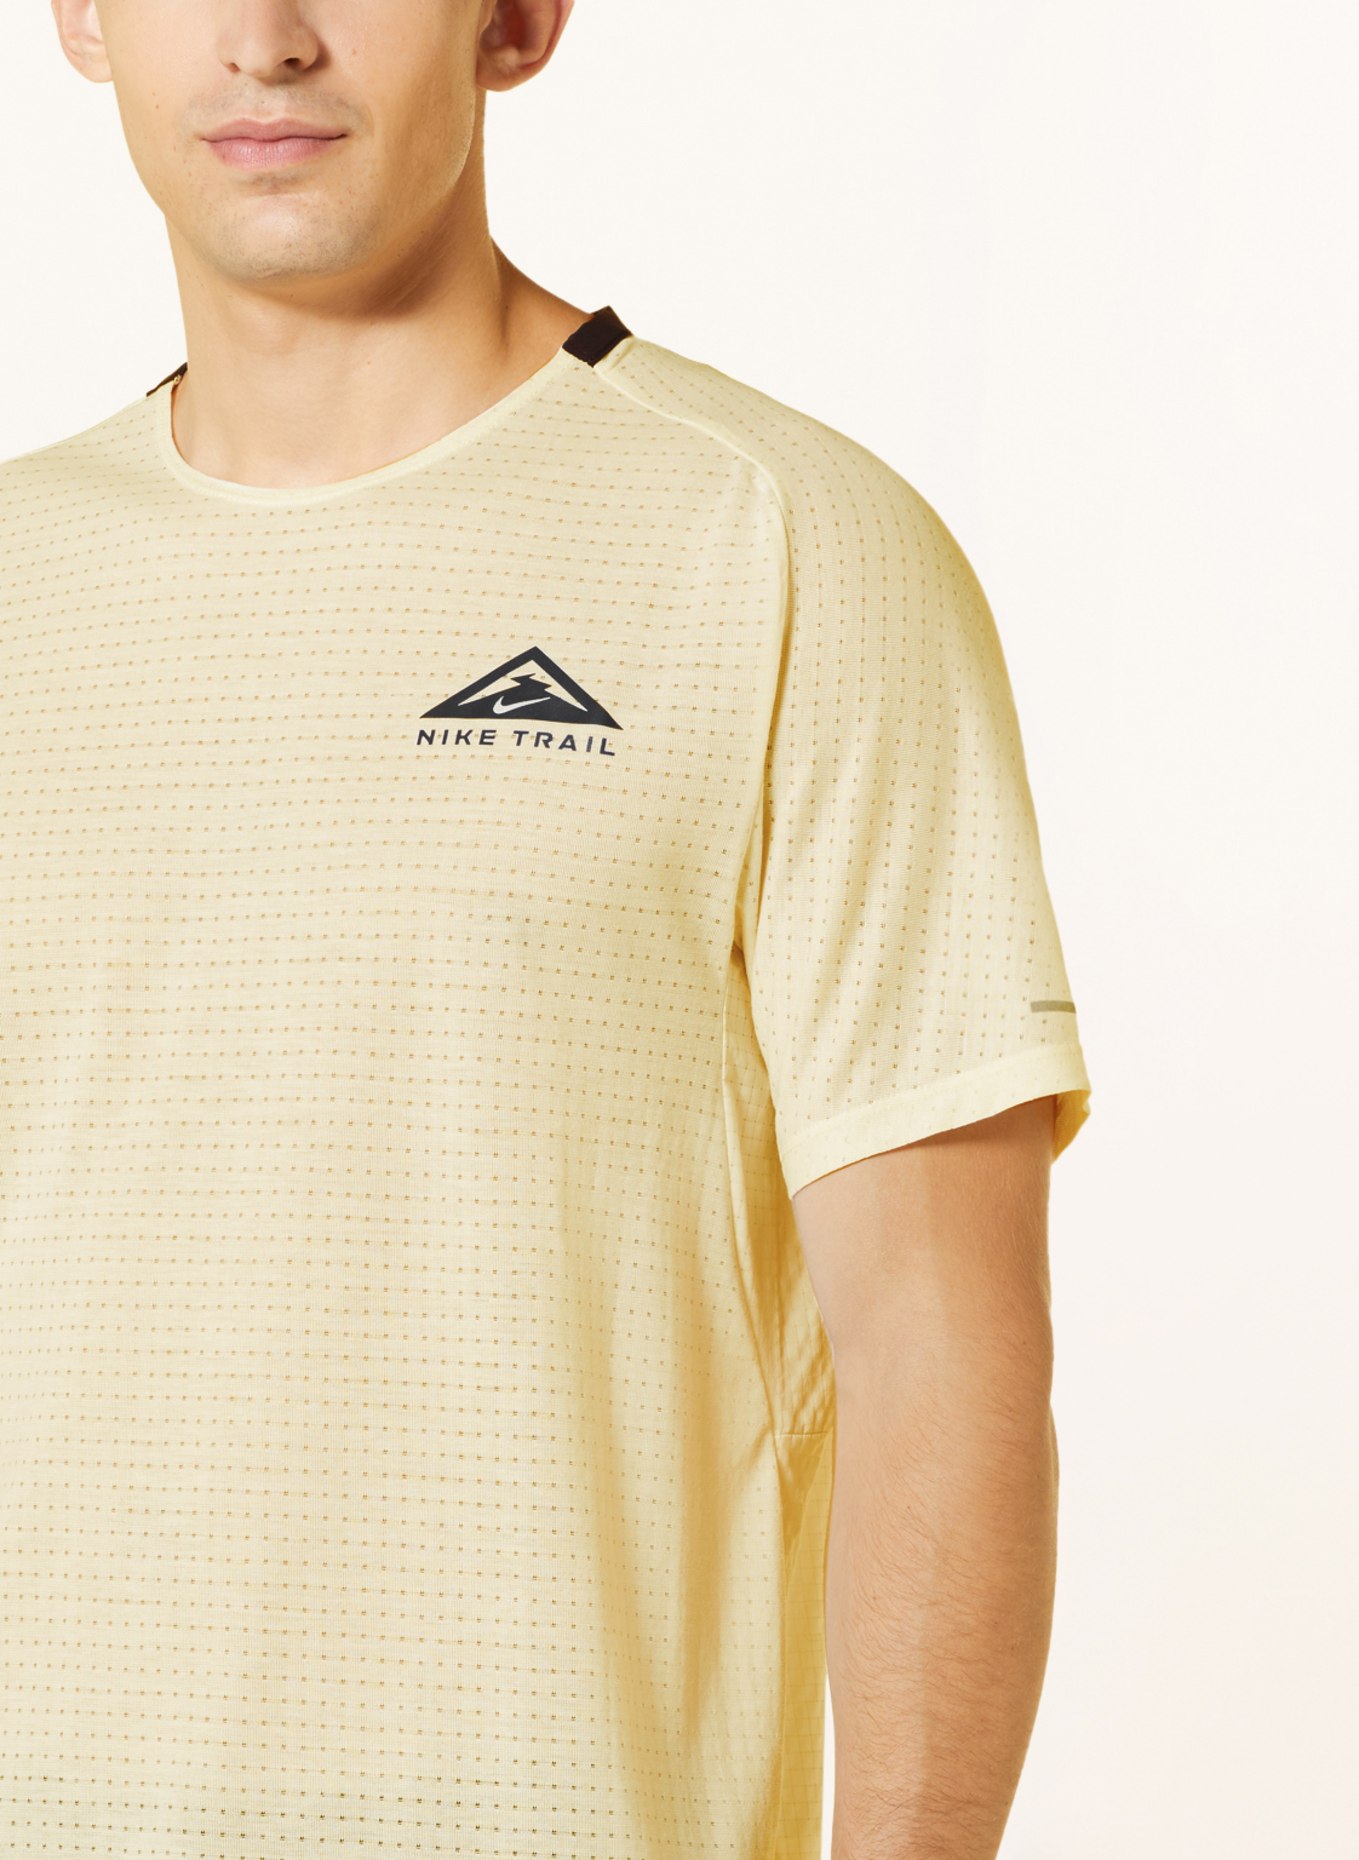 Nike Running shirt DRI-FIT TRAIL SOLAR CHASE, Color: LIGHT YELLOW (Image 4)